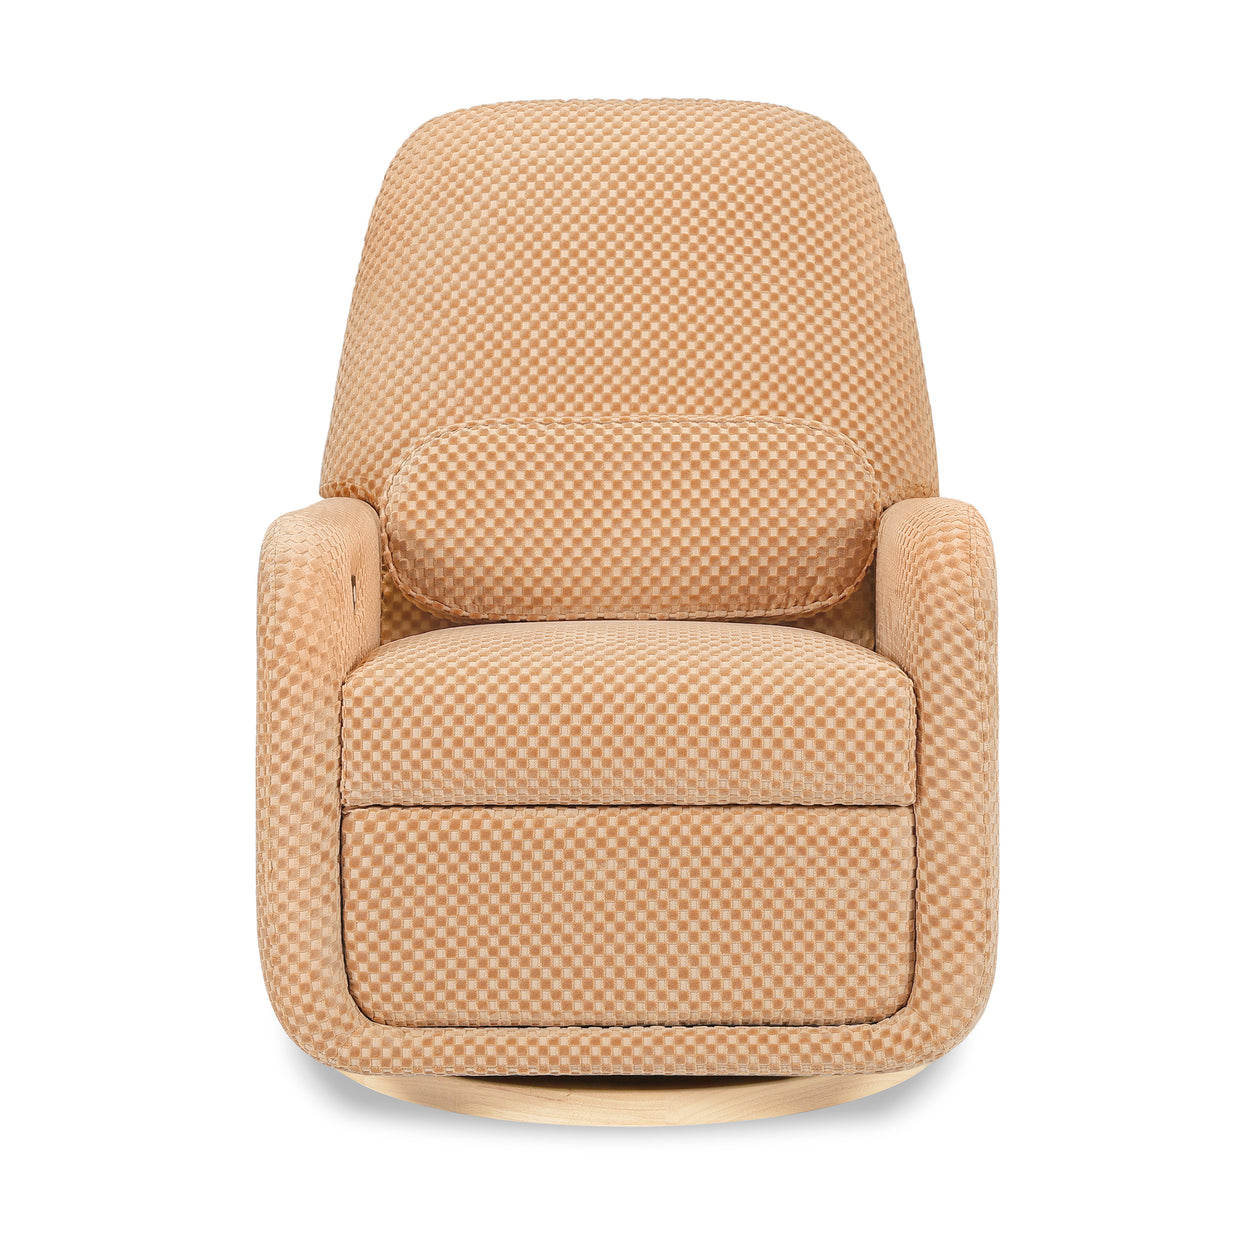 M23688CVCL,Arc Glider Recliner w/ Electronic Control and USB in Canyon Velvet Checker w/ Light Wood Base